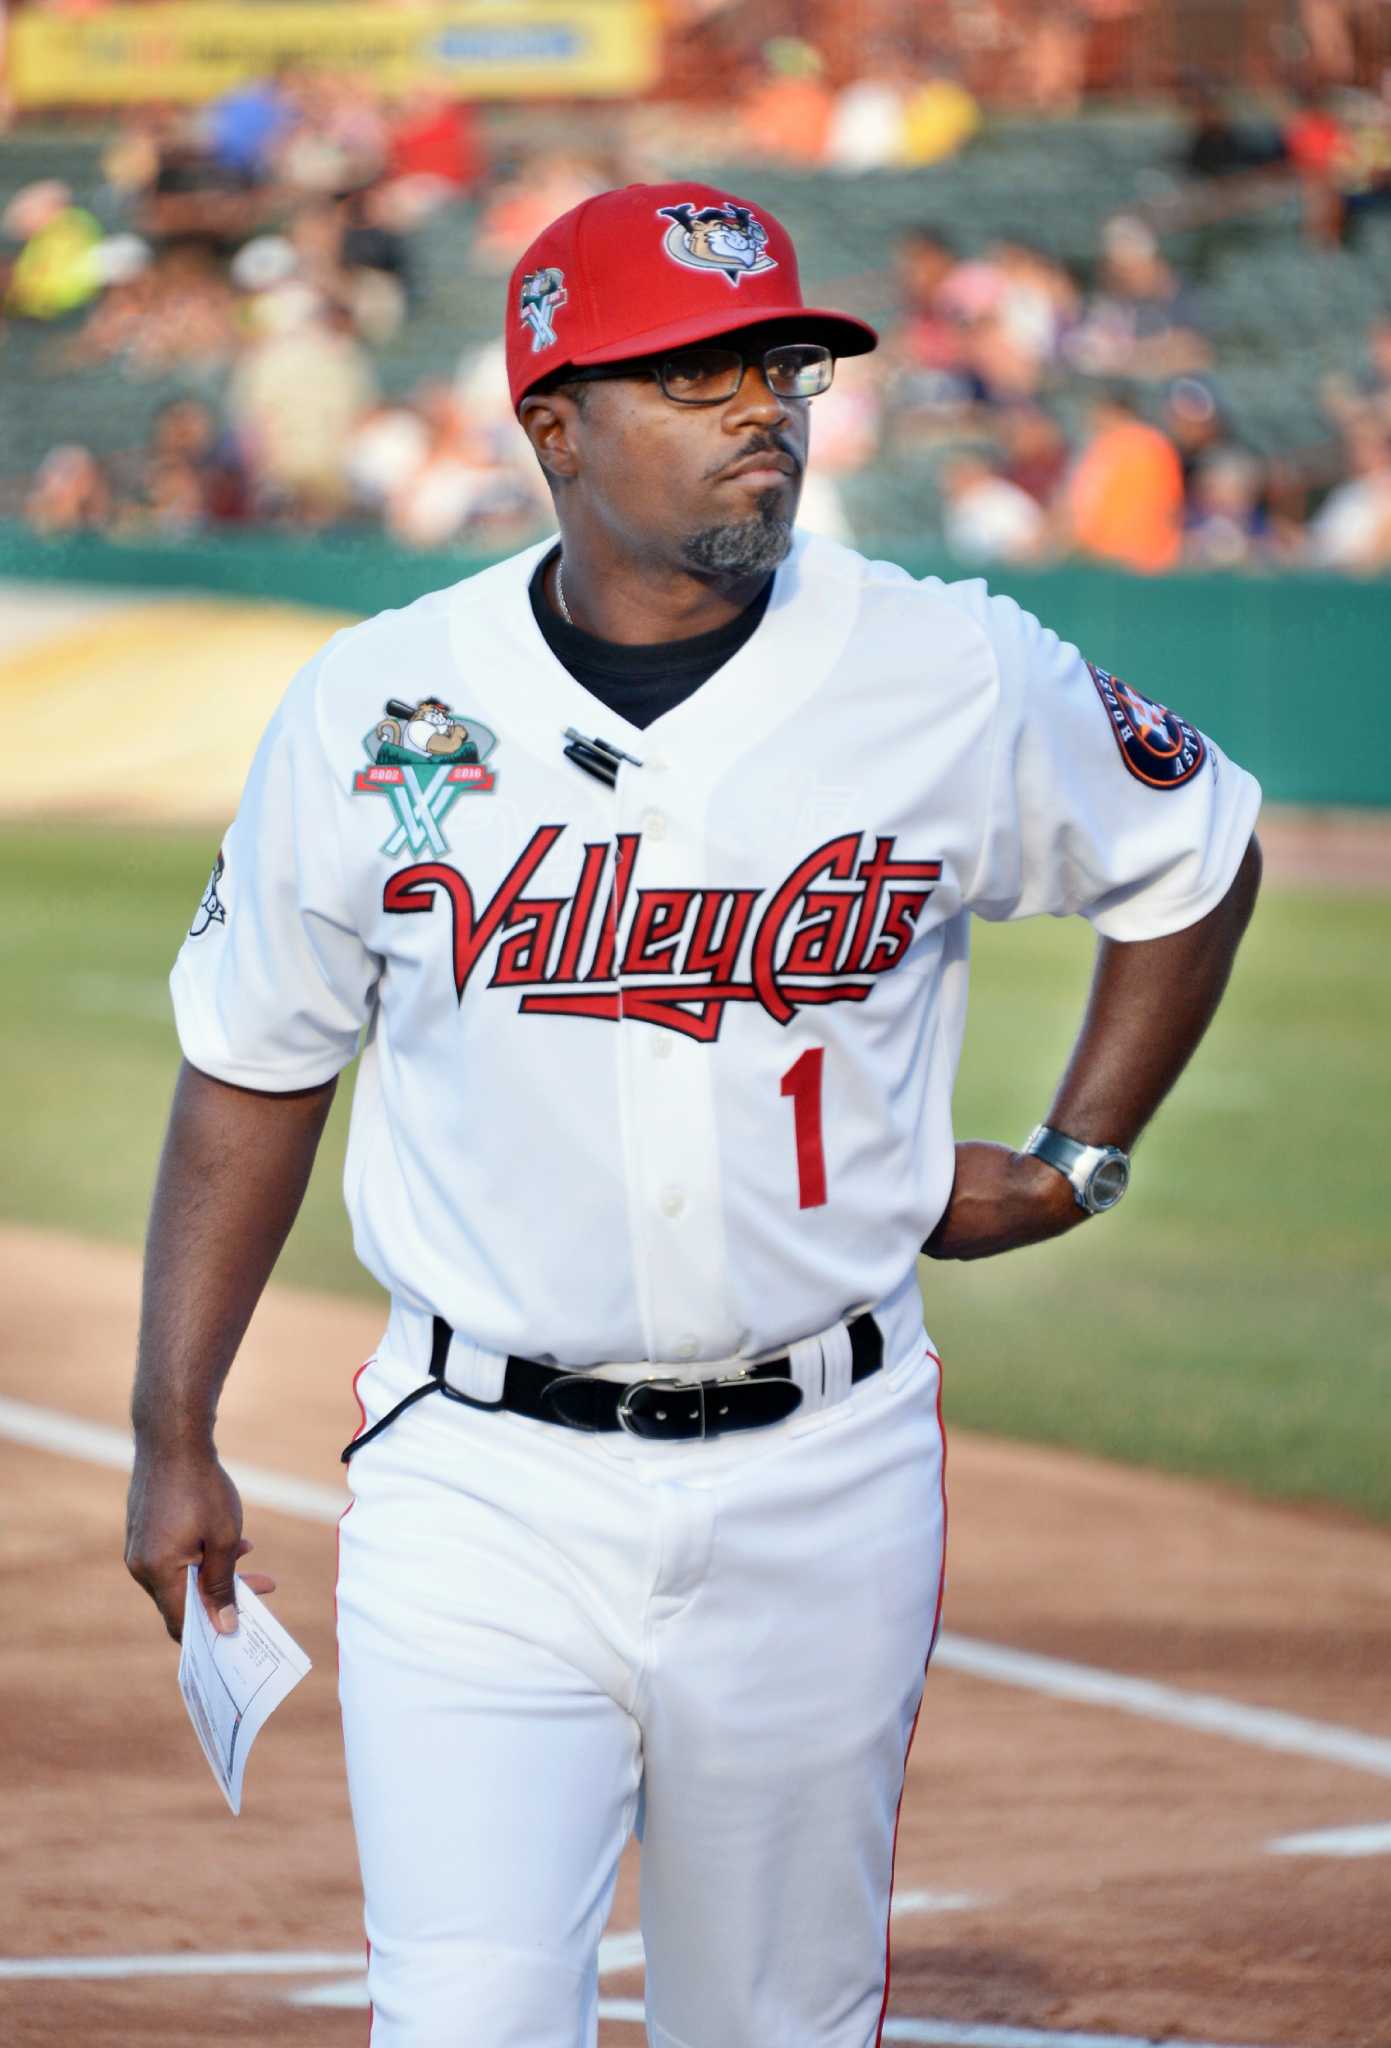 Q&A with ValleyCats manager Lamarr Rogers